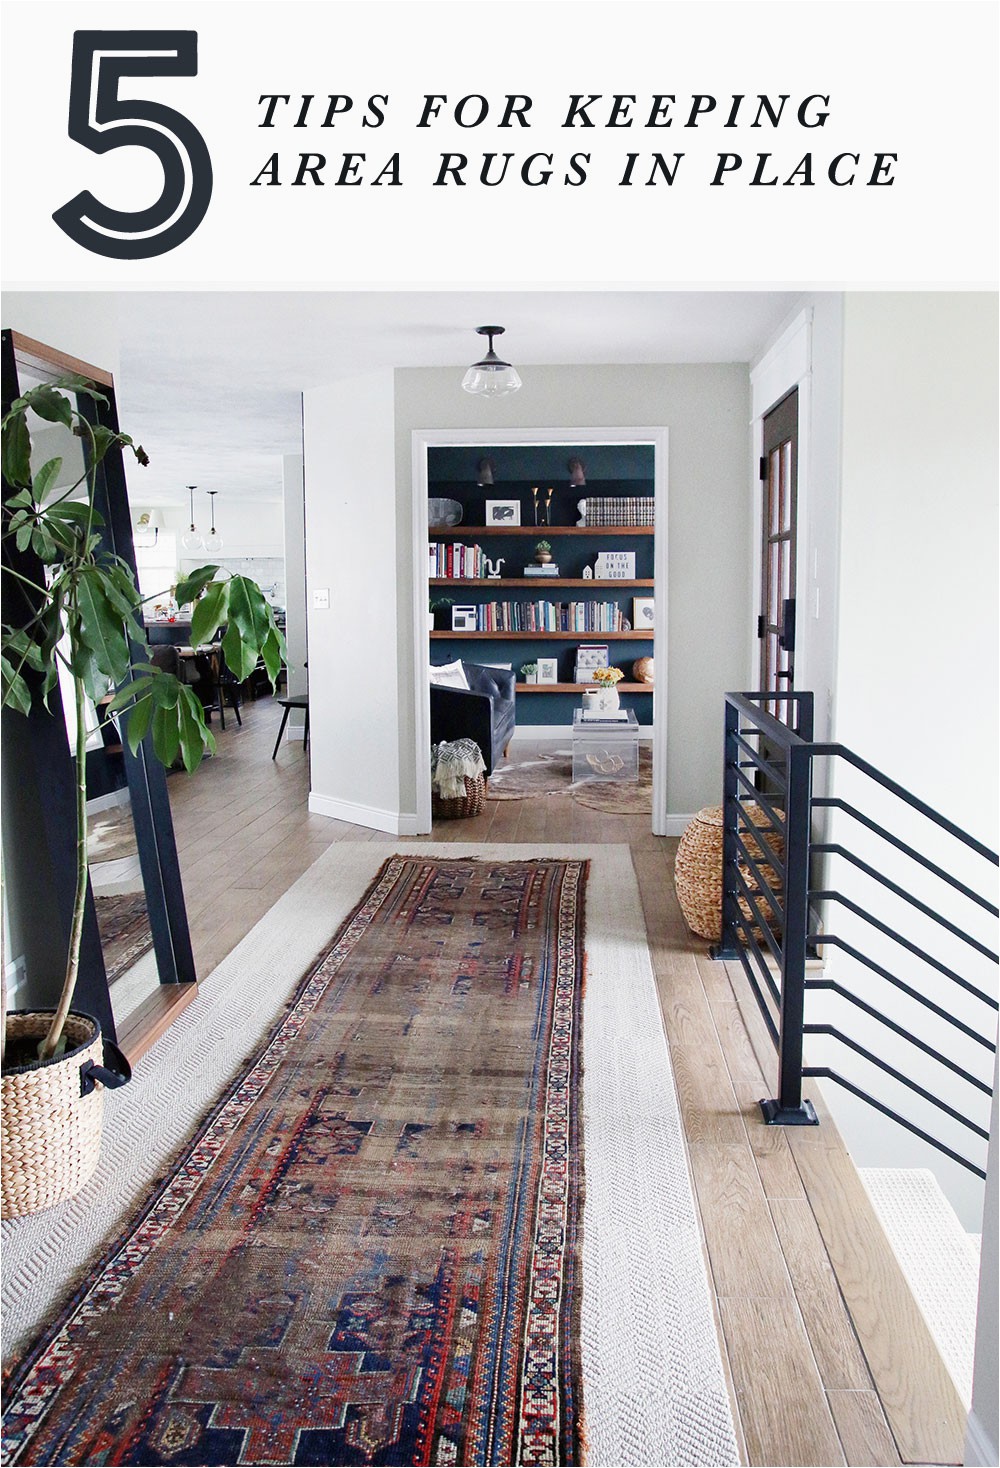 5 tips for keeping area rugs in place